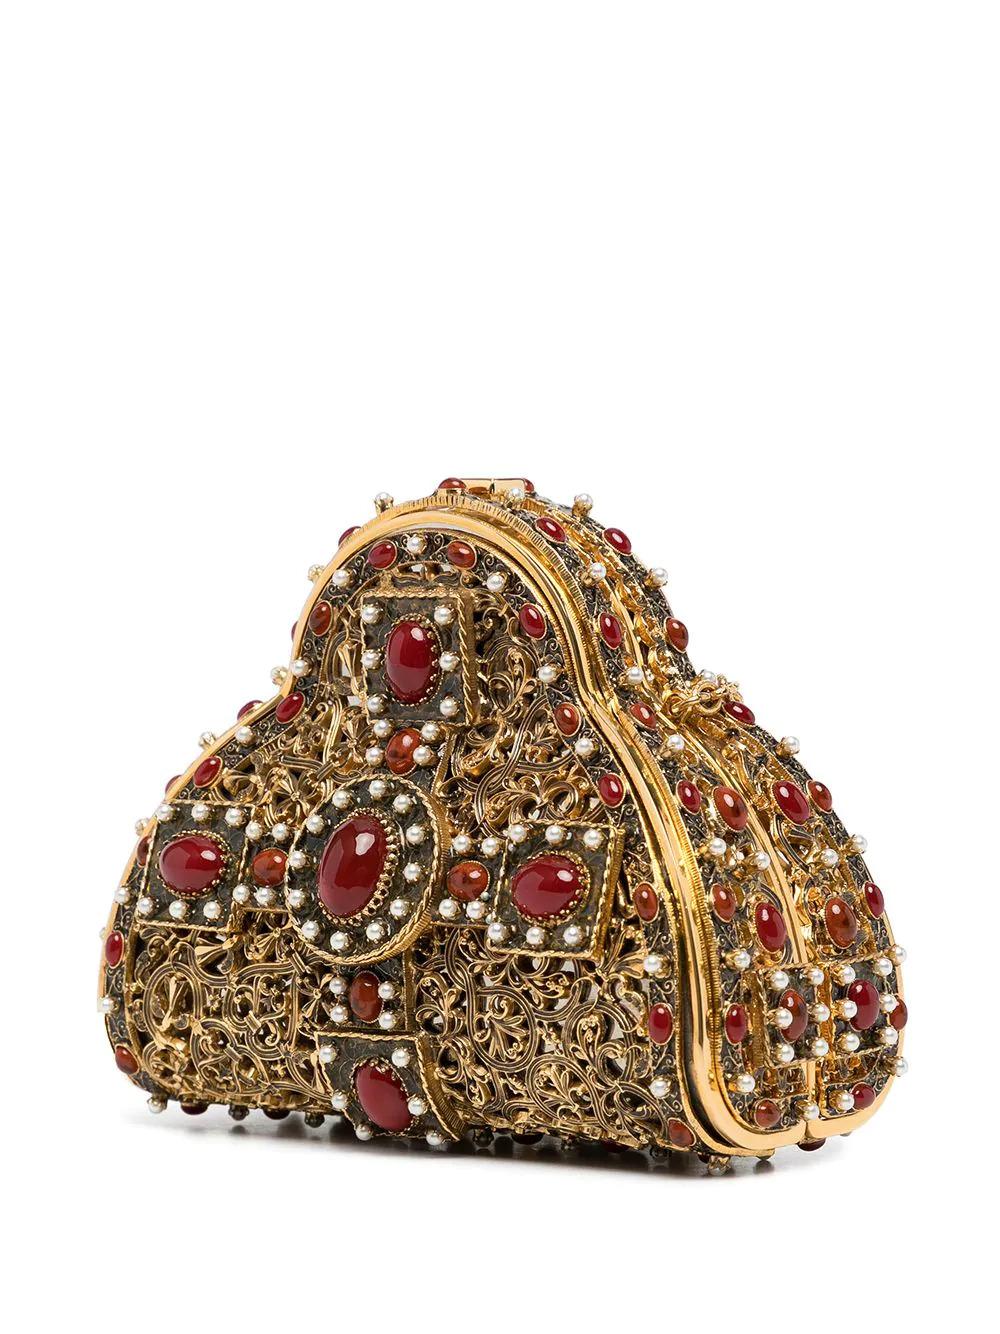 Based on Coco Chanel's flirtation with Russian-Parisian émigré society in the 1910s and 1920s, this pre-owned clutch bag featured on the pre-fall Metiers d'Art Paris-Moscow runway in 2009. Crafted from a 24k gold plated metal construction, this